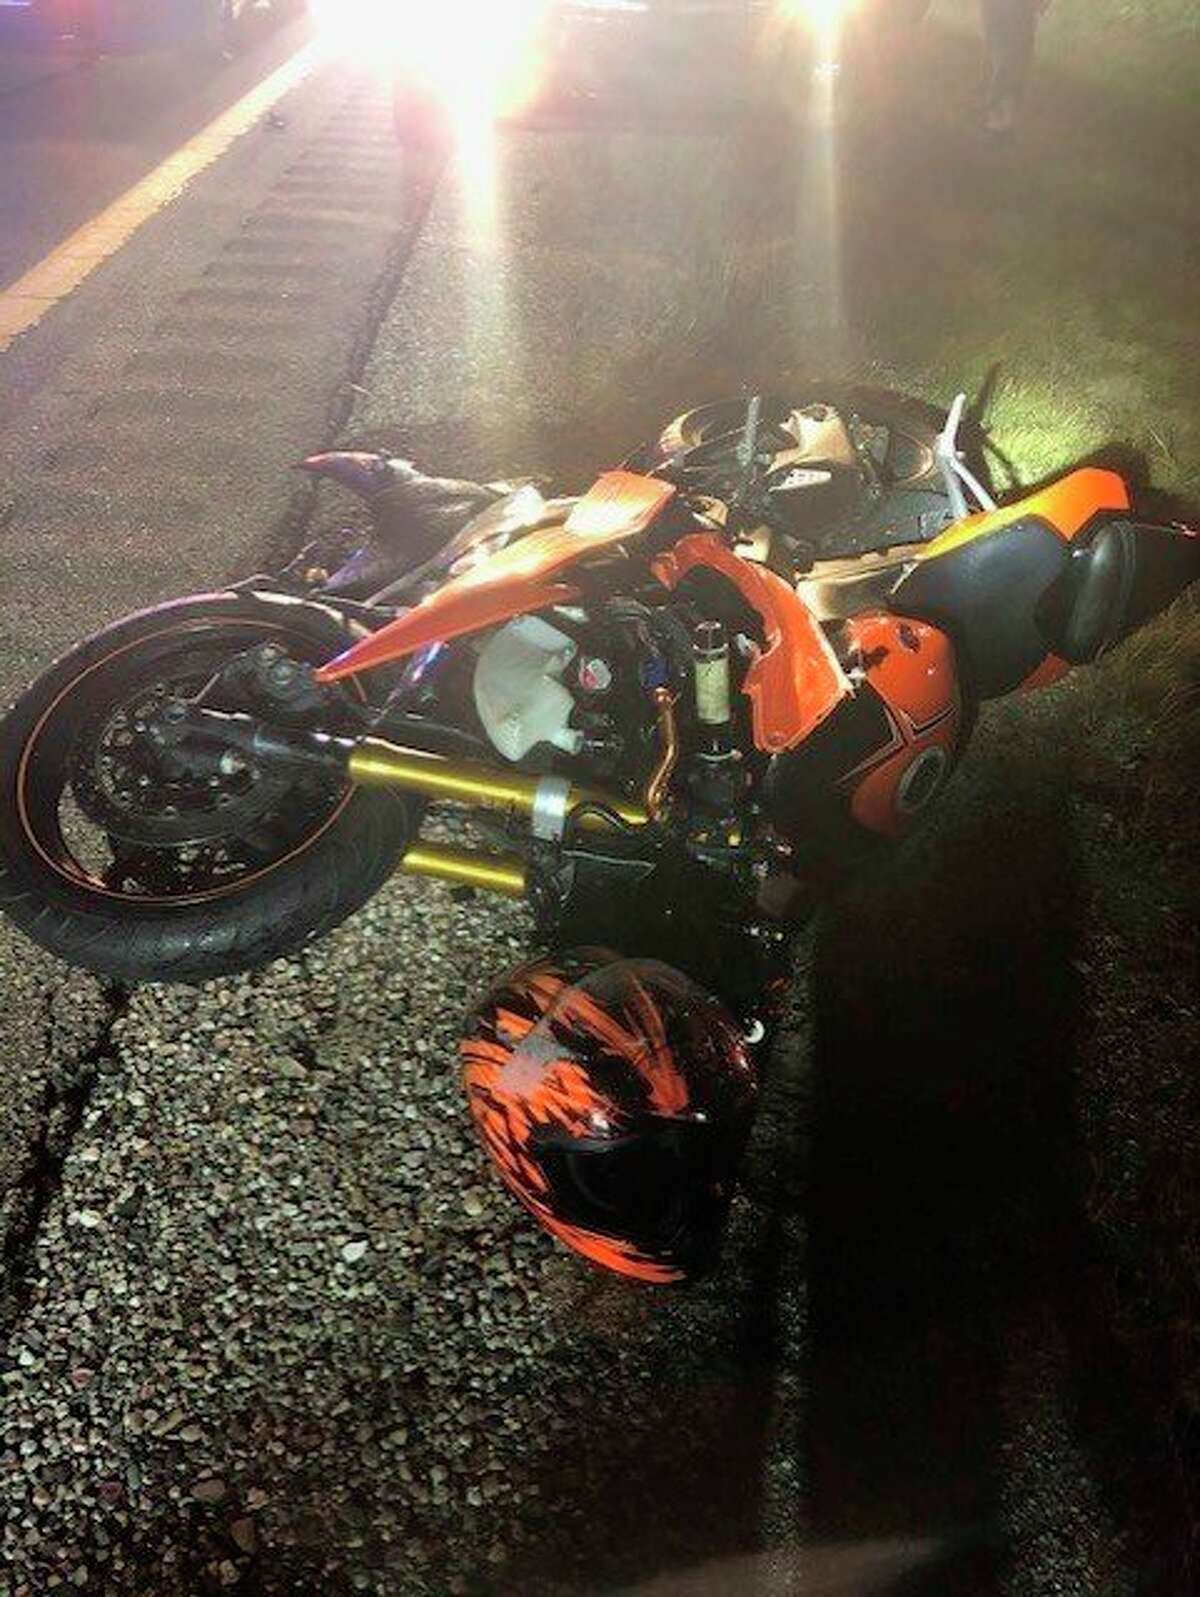 Two individuals were transported to the hospital after hitting a deer while riding a motorcycle Monday night. (Courtesy photo)